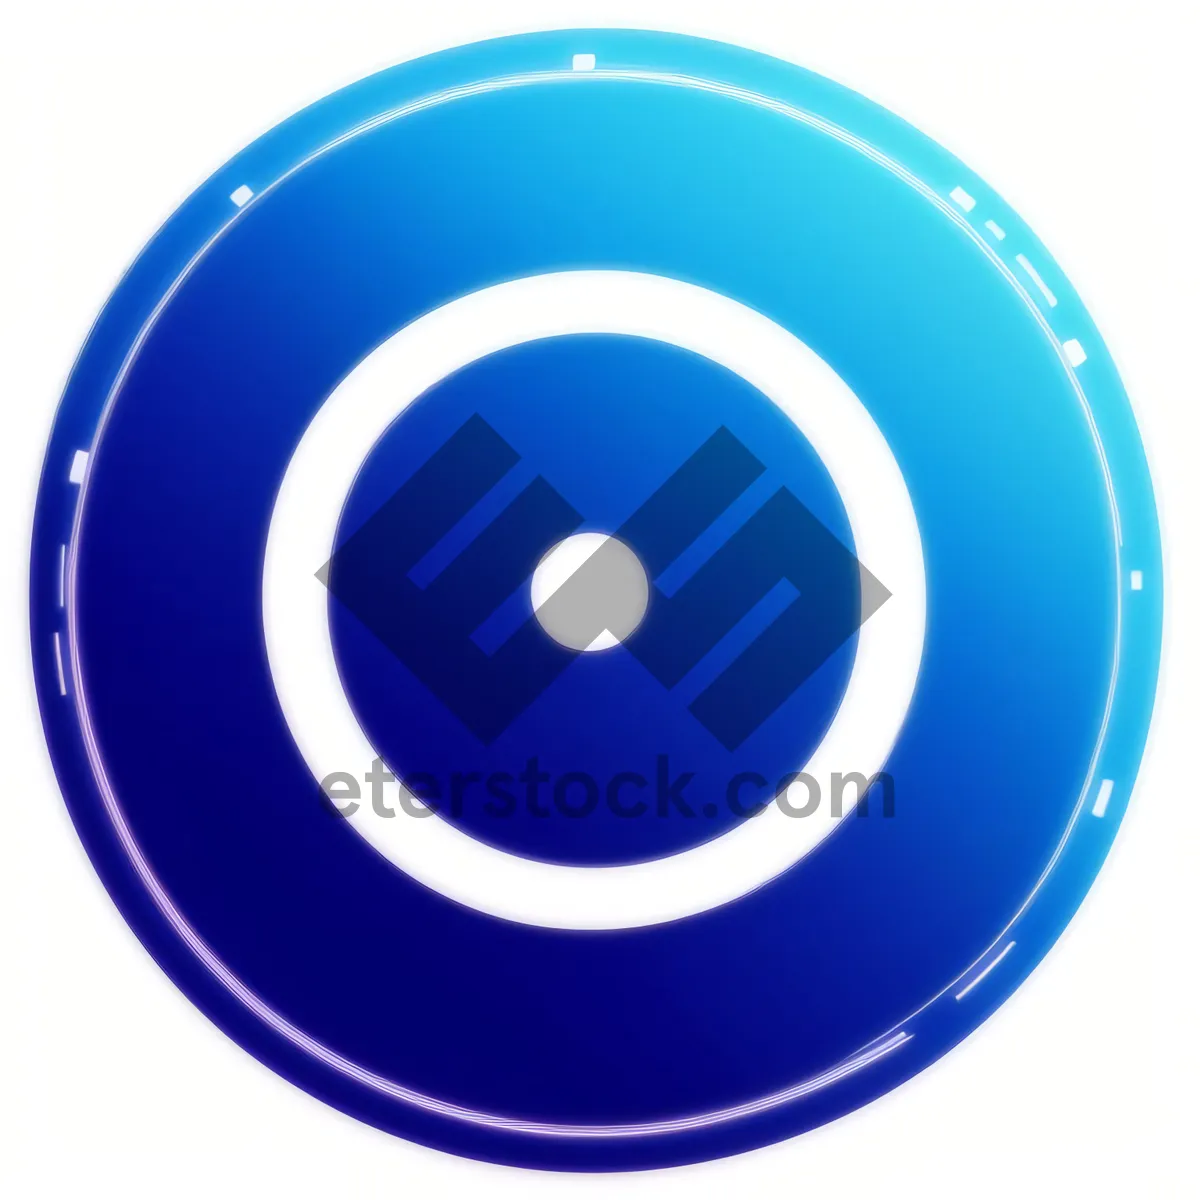 Picture of Web Button Set: Shiny Glossy Circle Icons